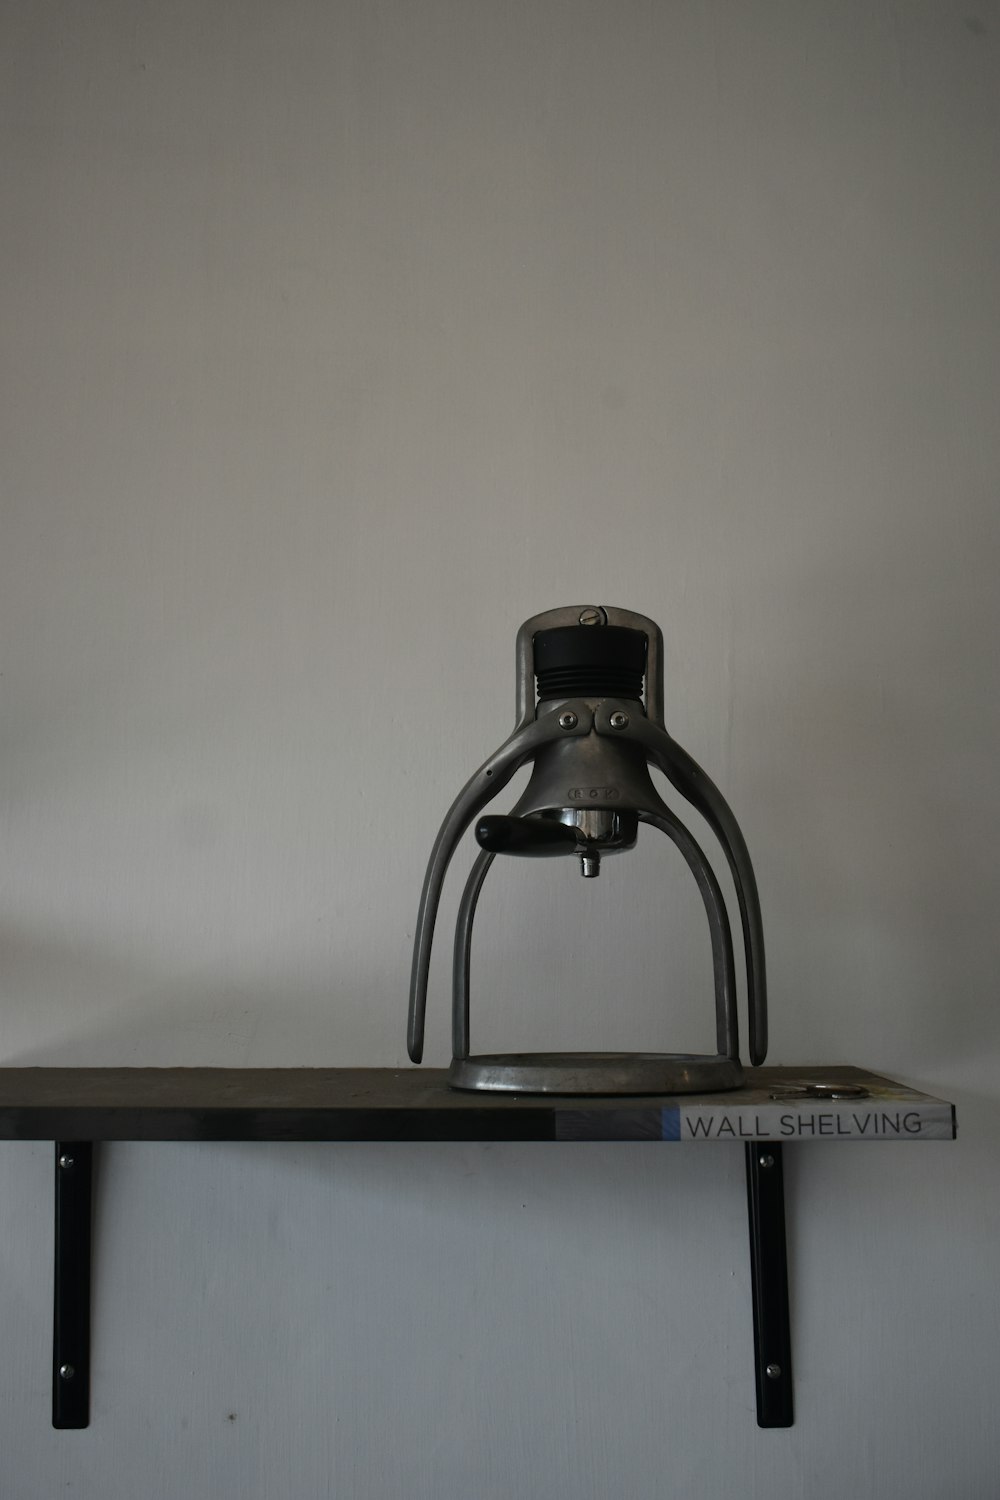 a metal object sitting on top of a shelf